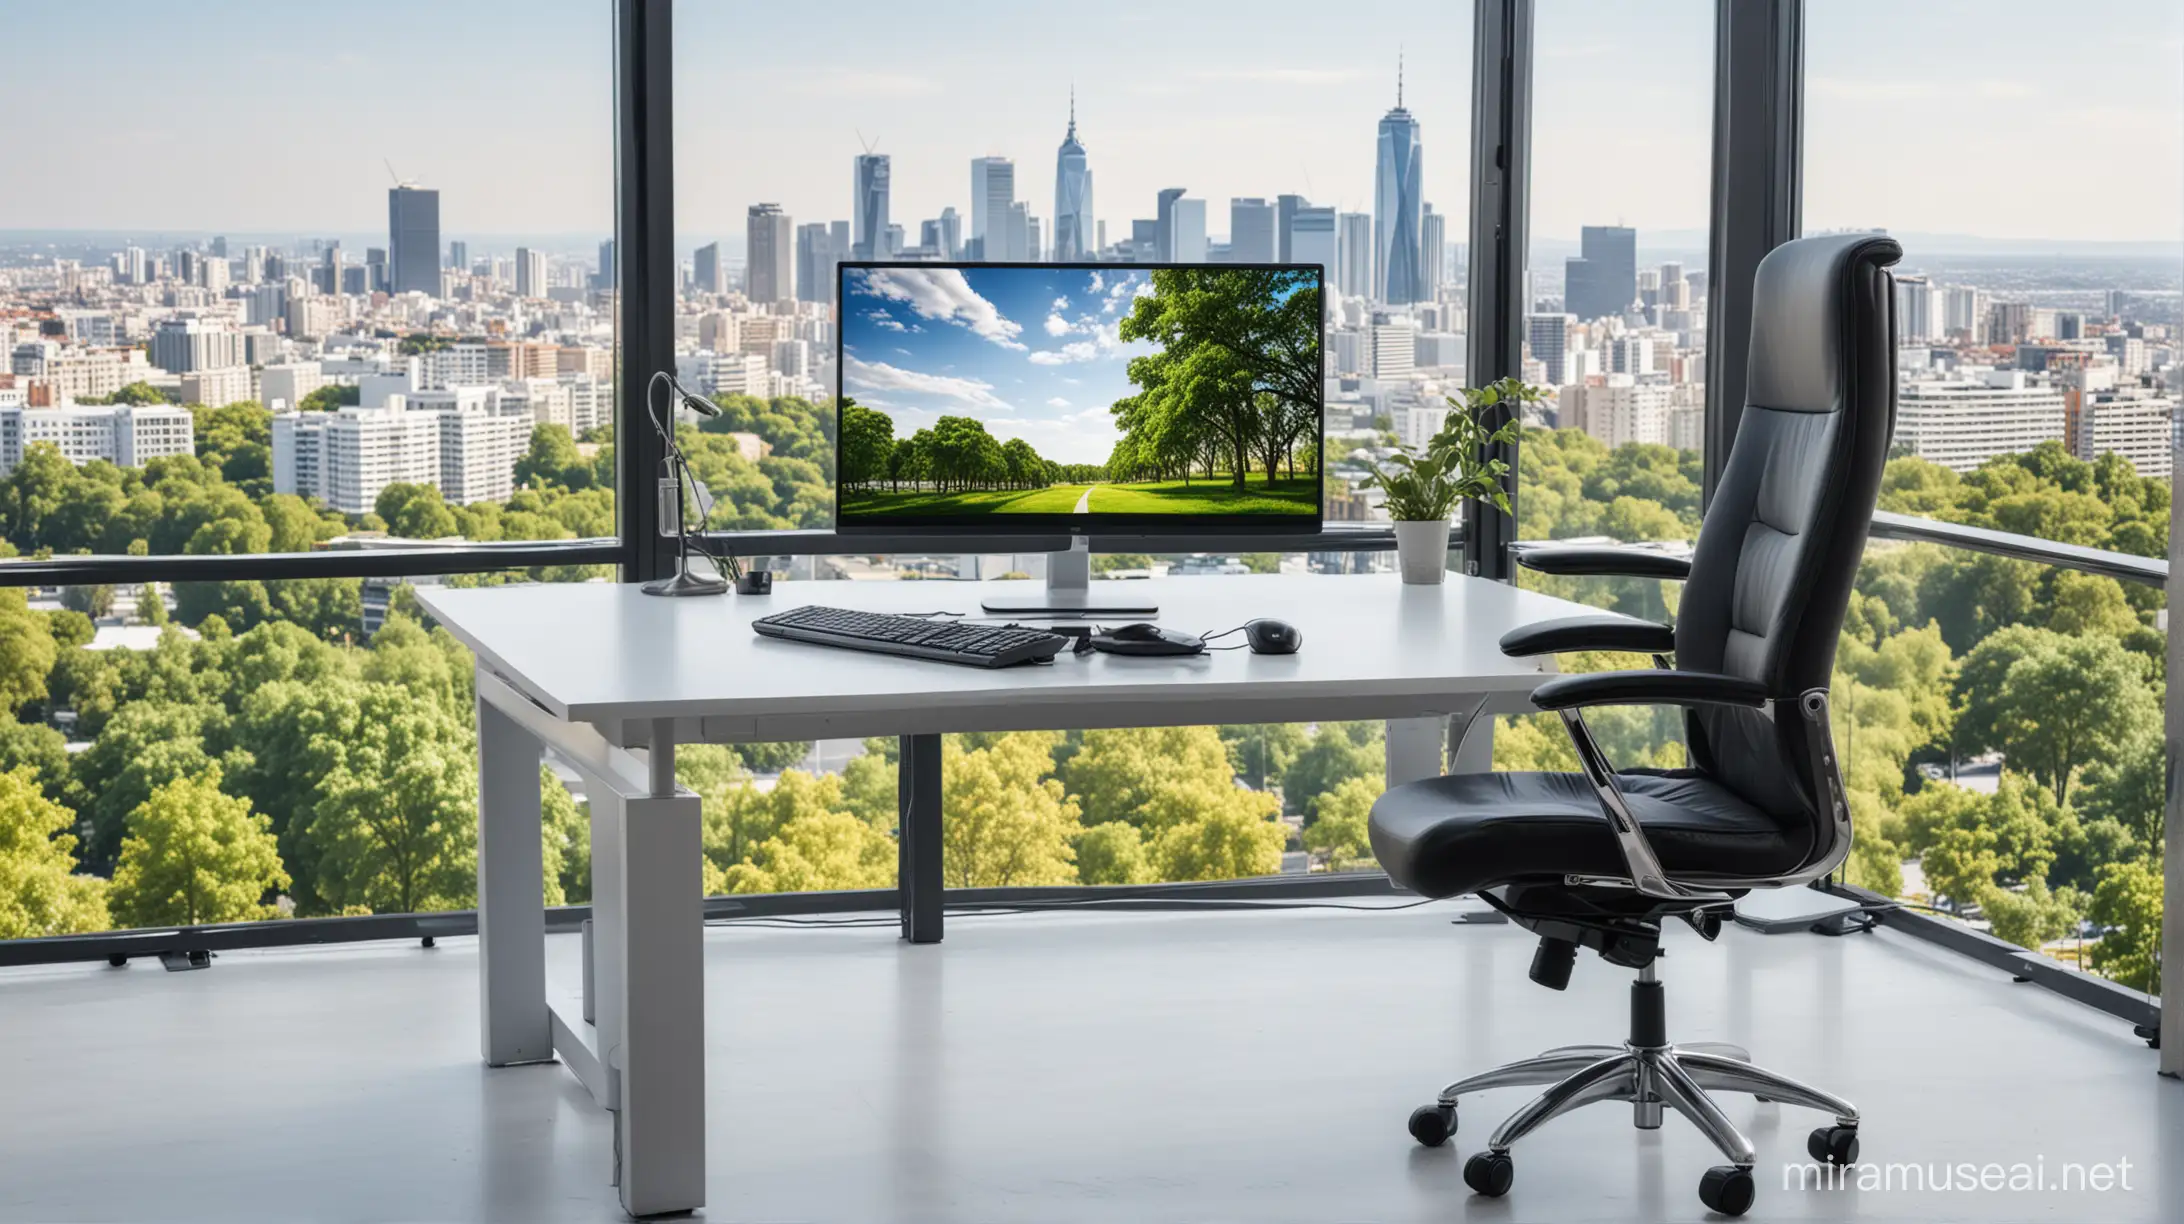 black office chair,  black keyboard and one silver computer monitor  on white table top, situated in a modern office with a modern city background with sunny and blue sky, green trees